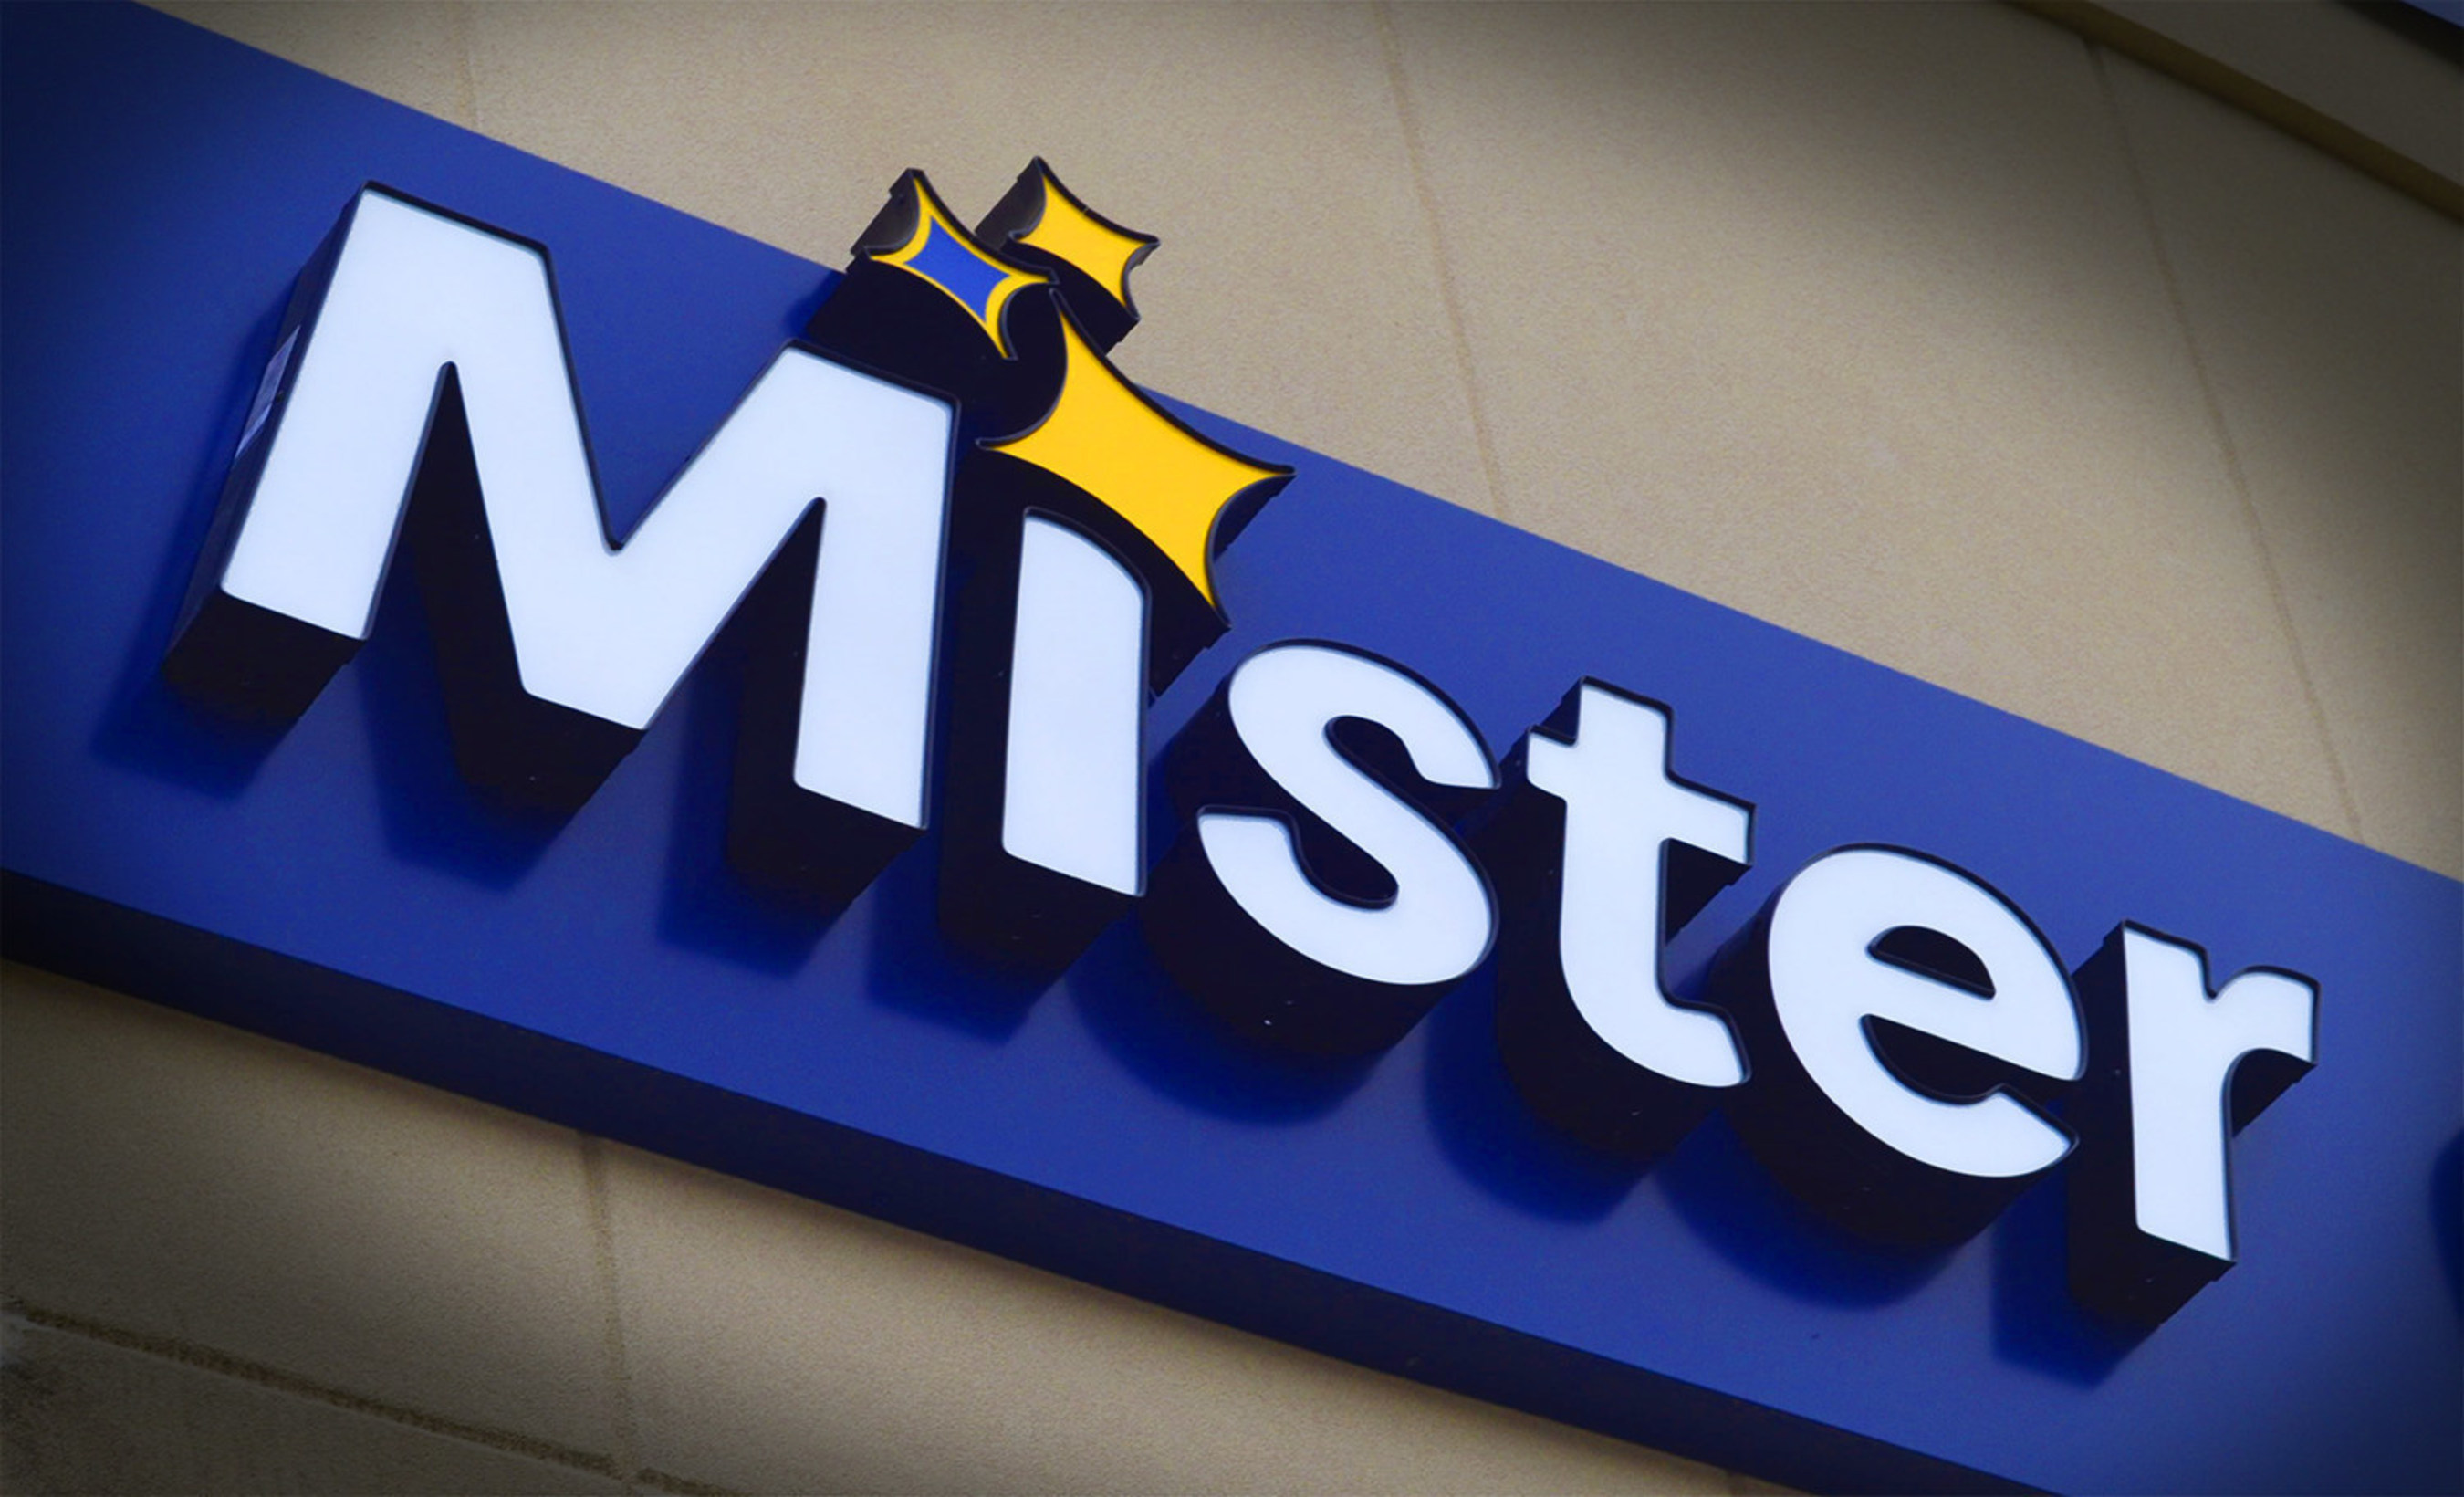 Headquartered in Tucson, Arizona, Mister Car Wash operates 188 car washes and 34 express lubes in 20 states.